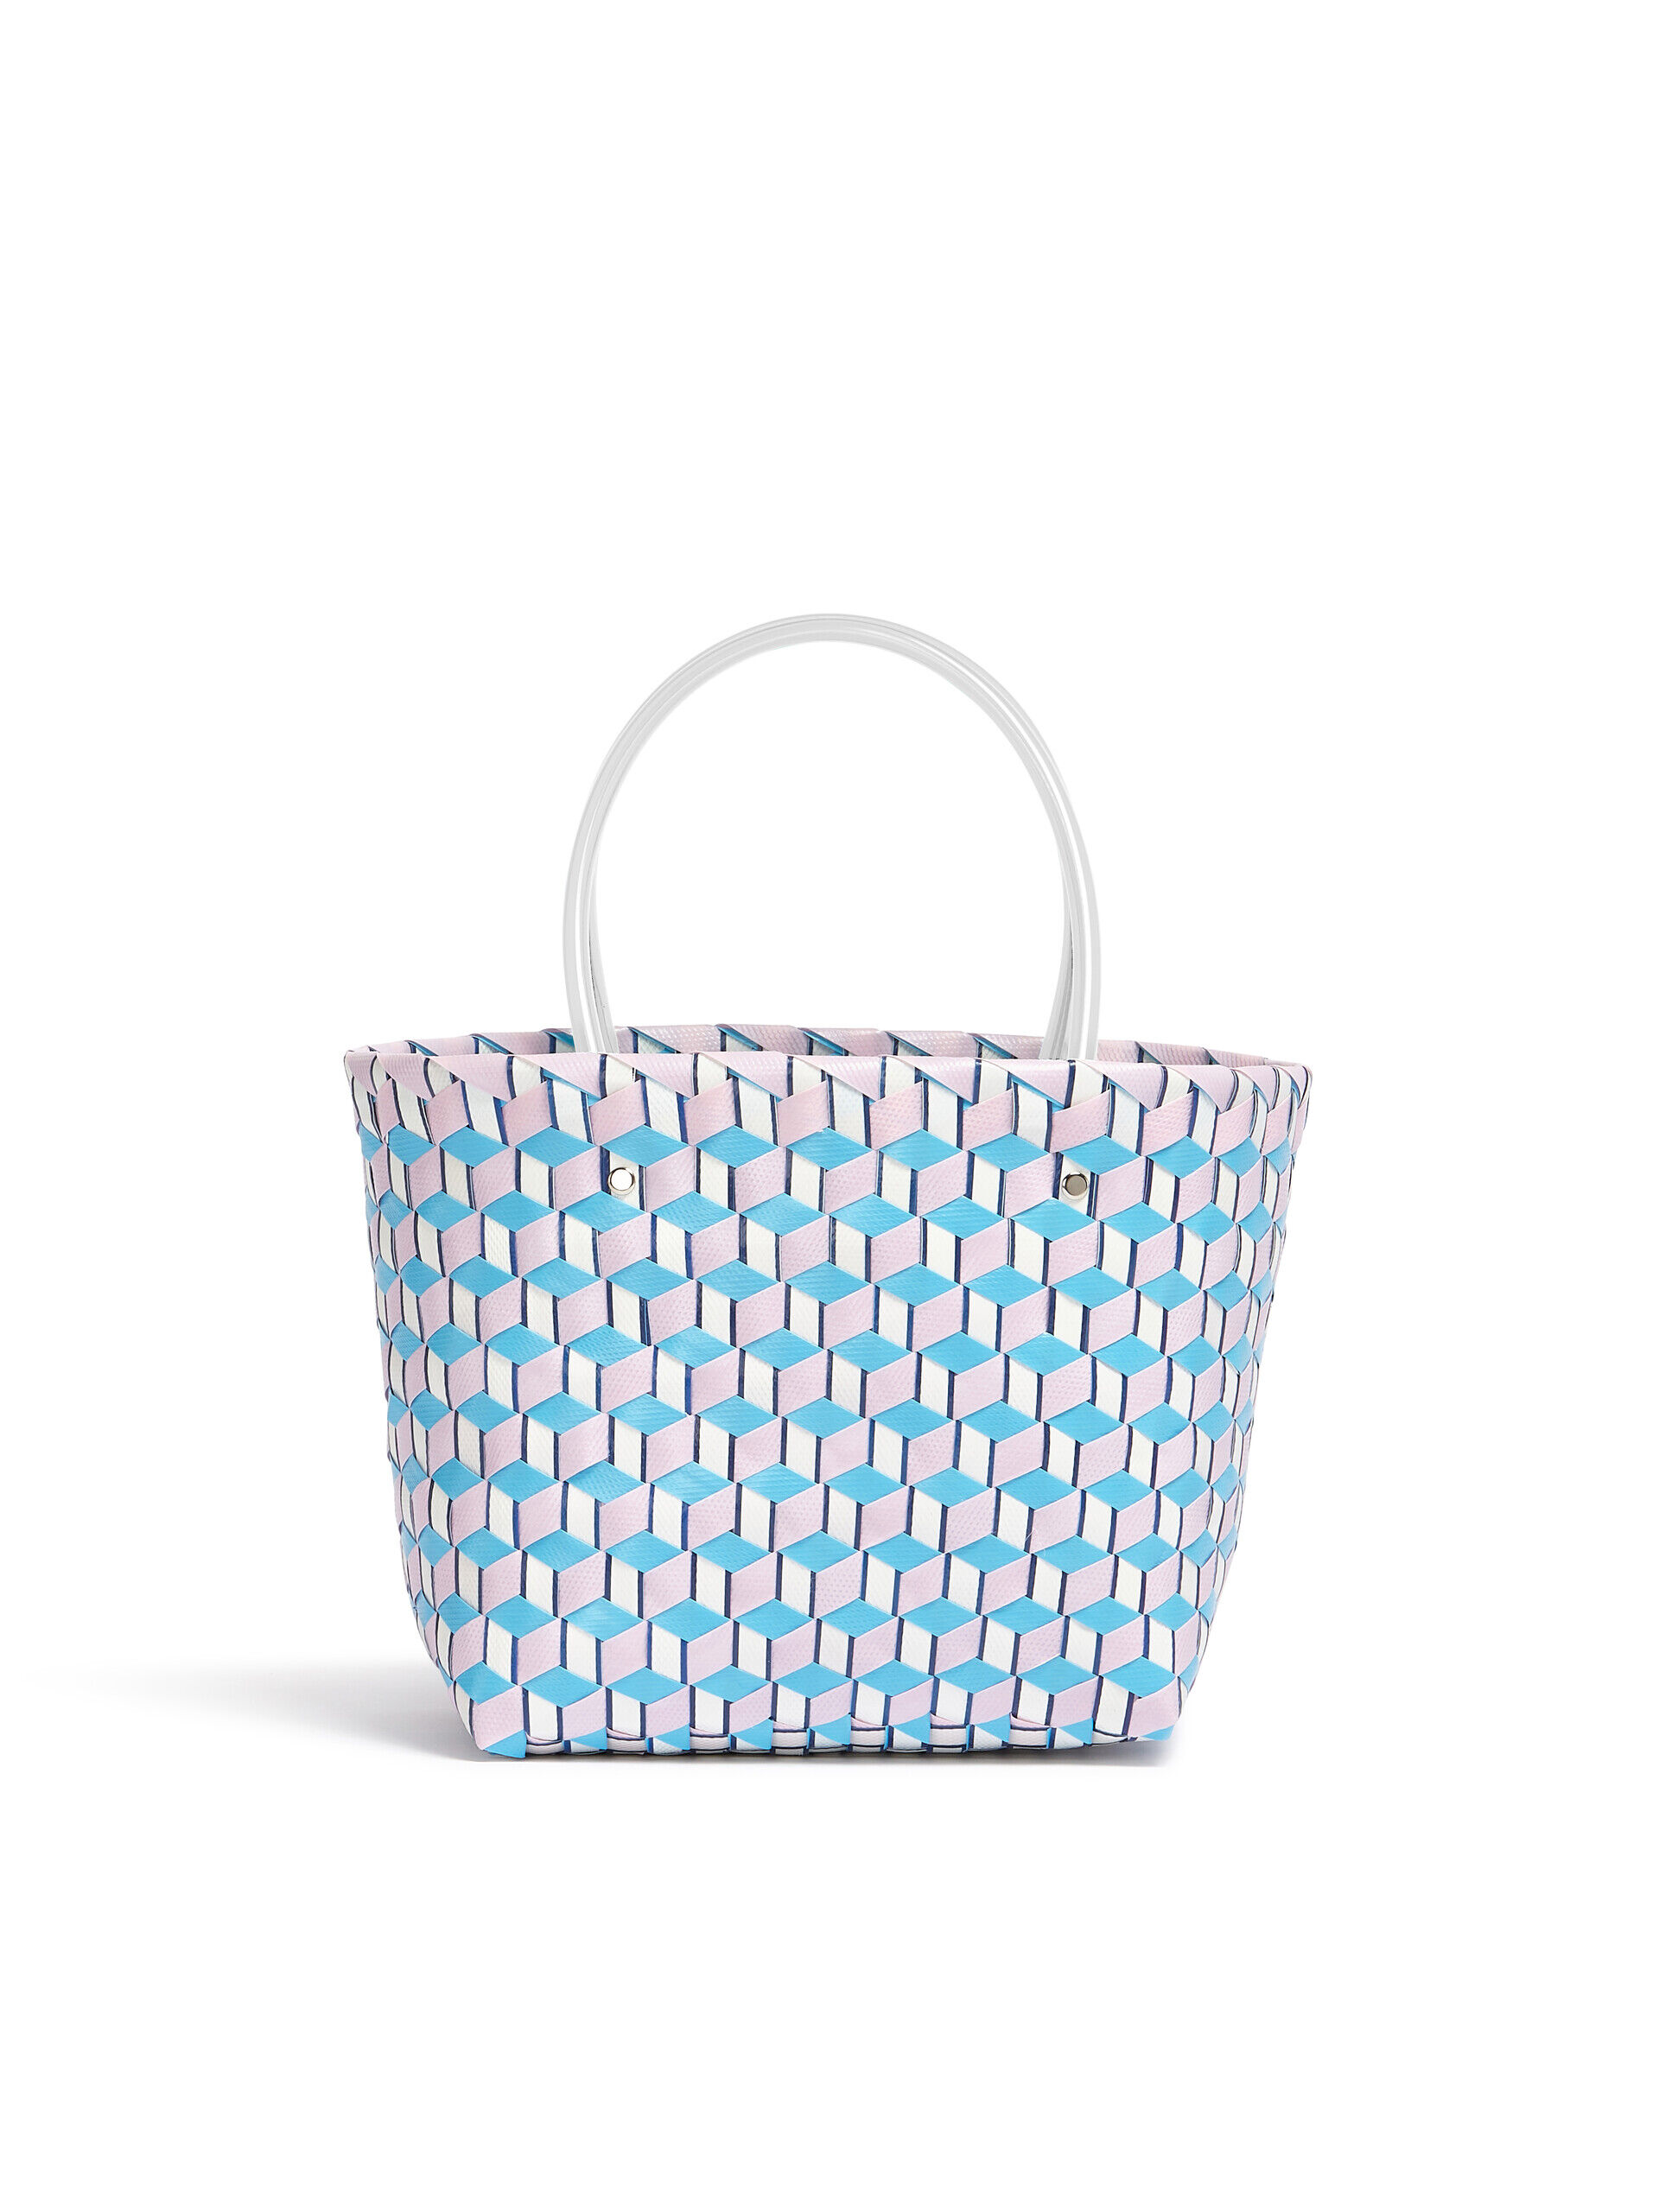 MARNI MARKET 3D BAG in pale blue cube woven material | Marni